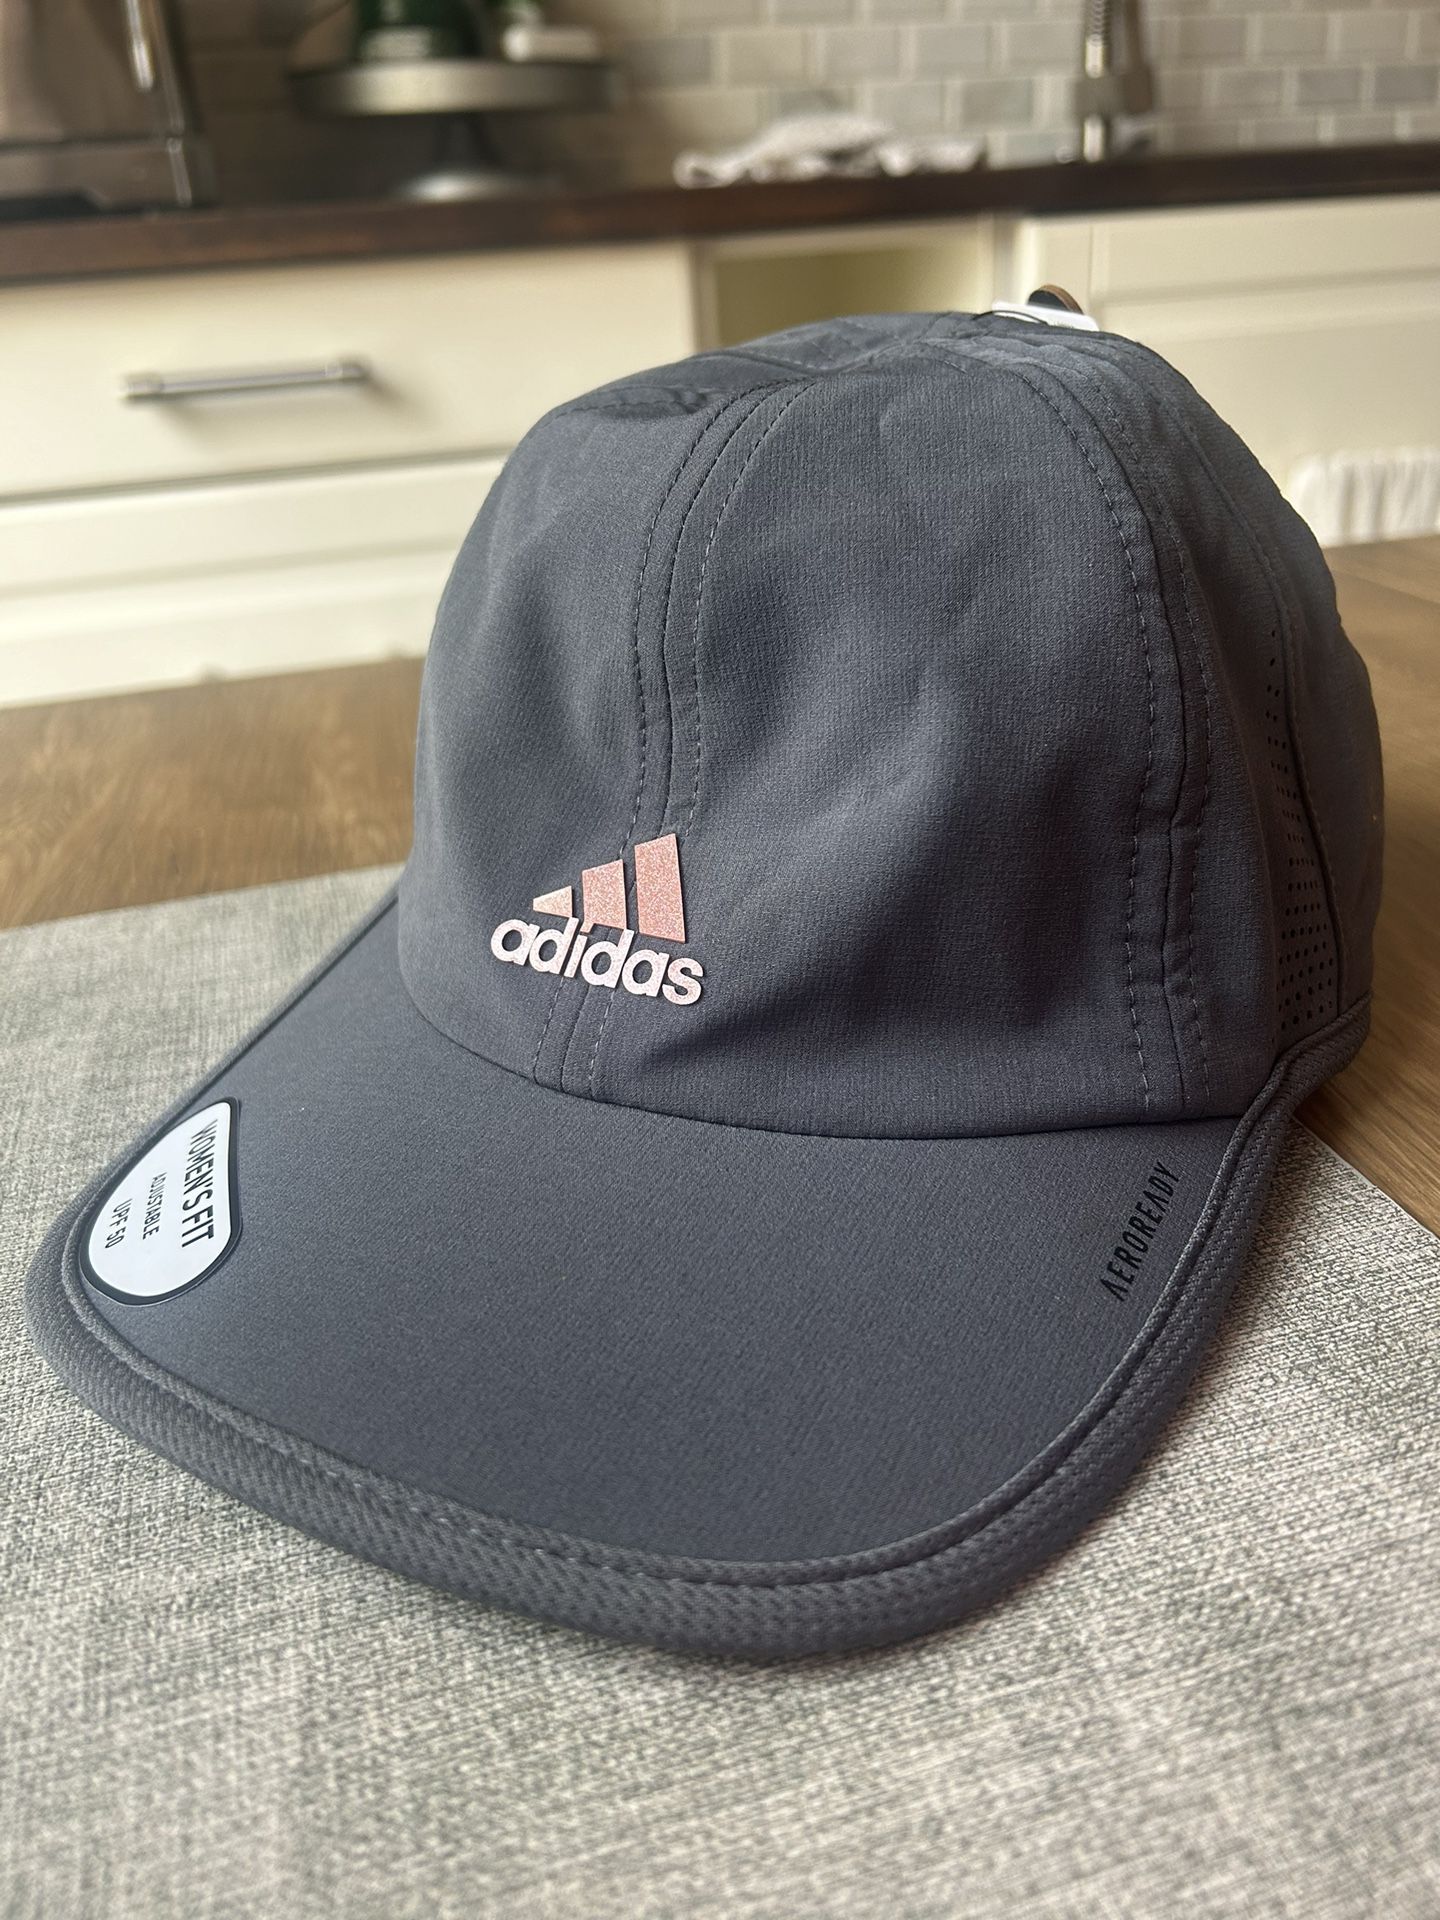 adidas hat, gray&pink, women’s fit